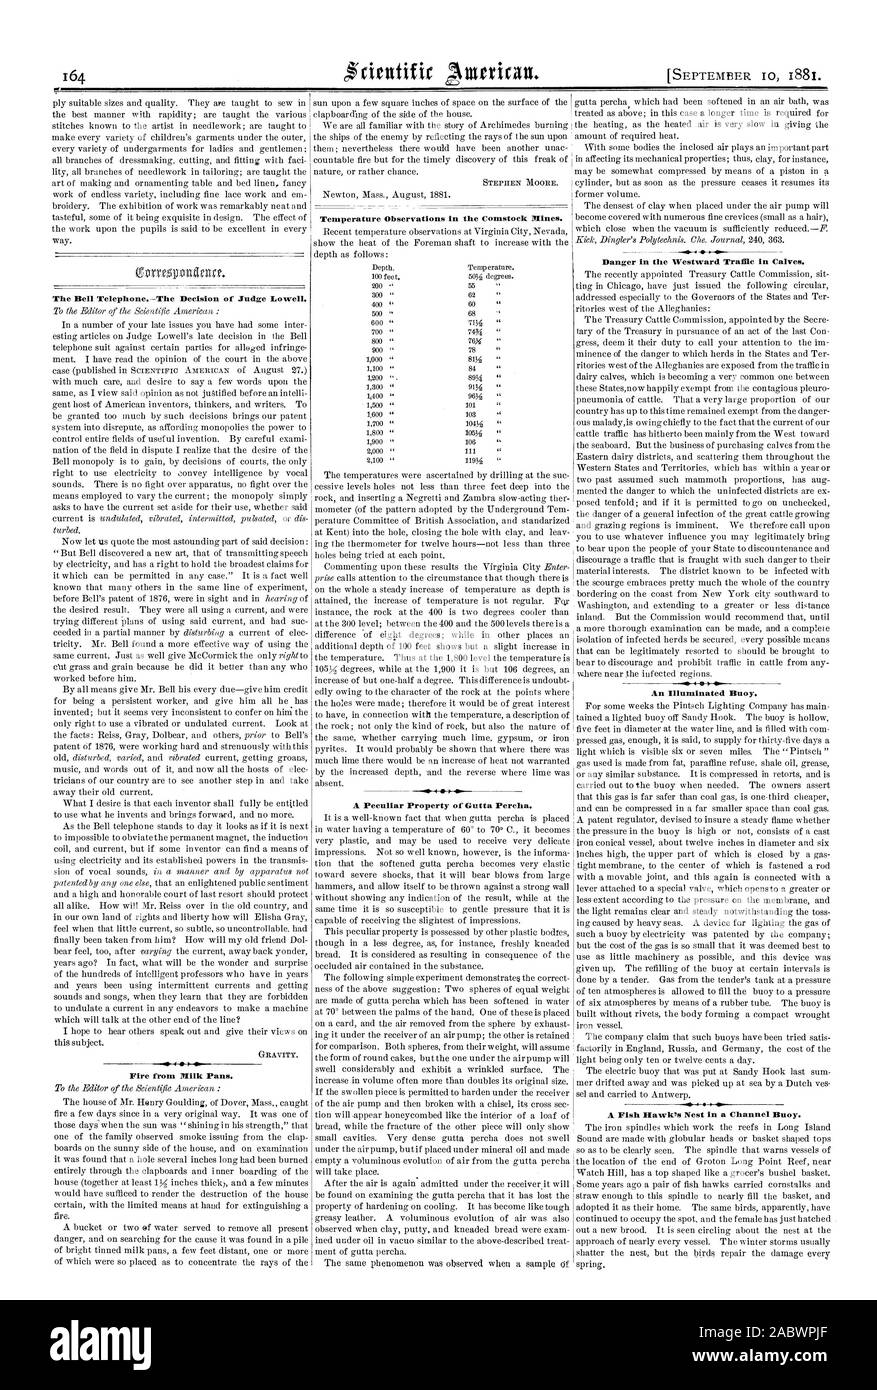 The Bell TelephoneThe Decision of Judge Lowell. Fire from Milk Pans. Temperature Observations in the Comstock Mines. A Peculiar Property of Gutta Percha. Danger in the Westward Traffic in Calves. An Illuminated Buoy. A Fish Hawk's Nest in a Channel Buoy., scientific american, 81-09-10 Stock Photo